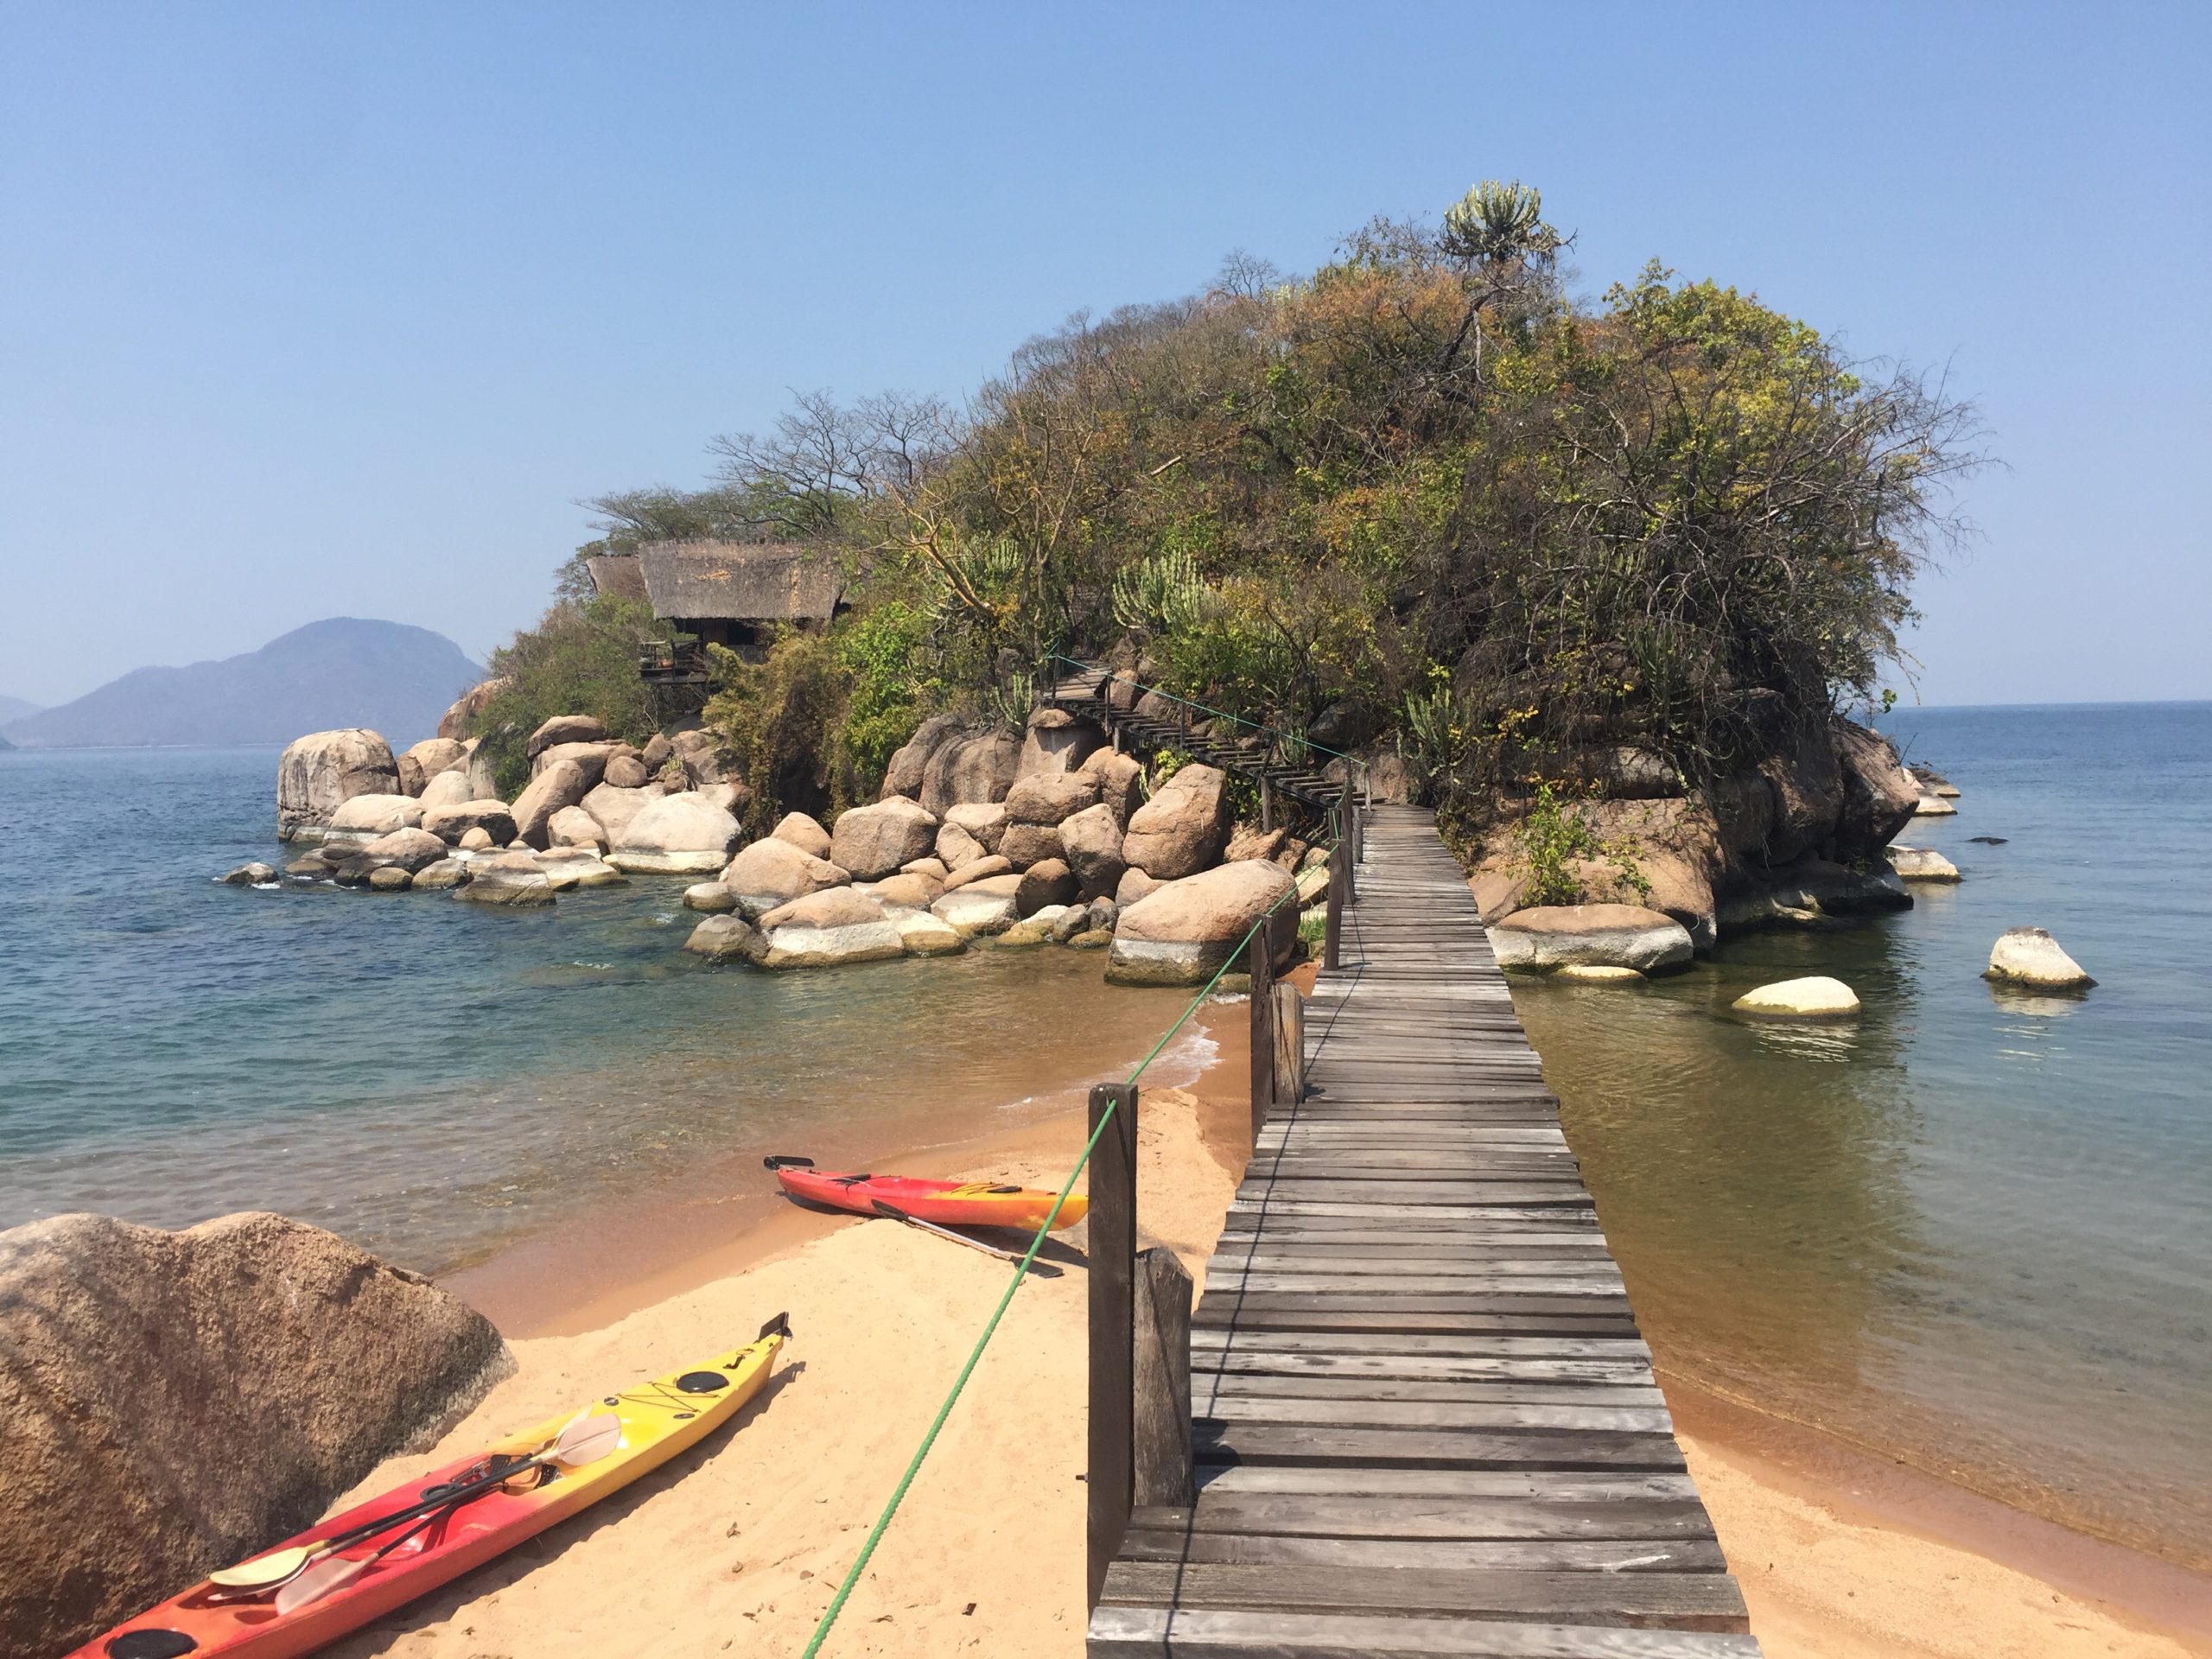 10 places to visit this summer: mumbo island